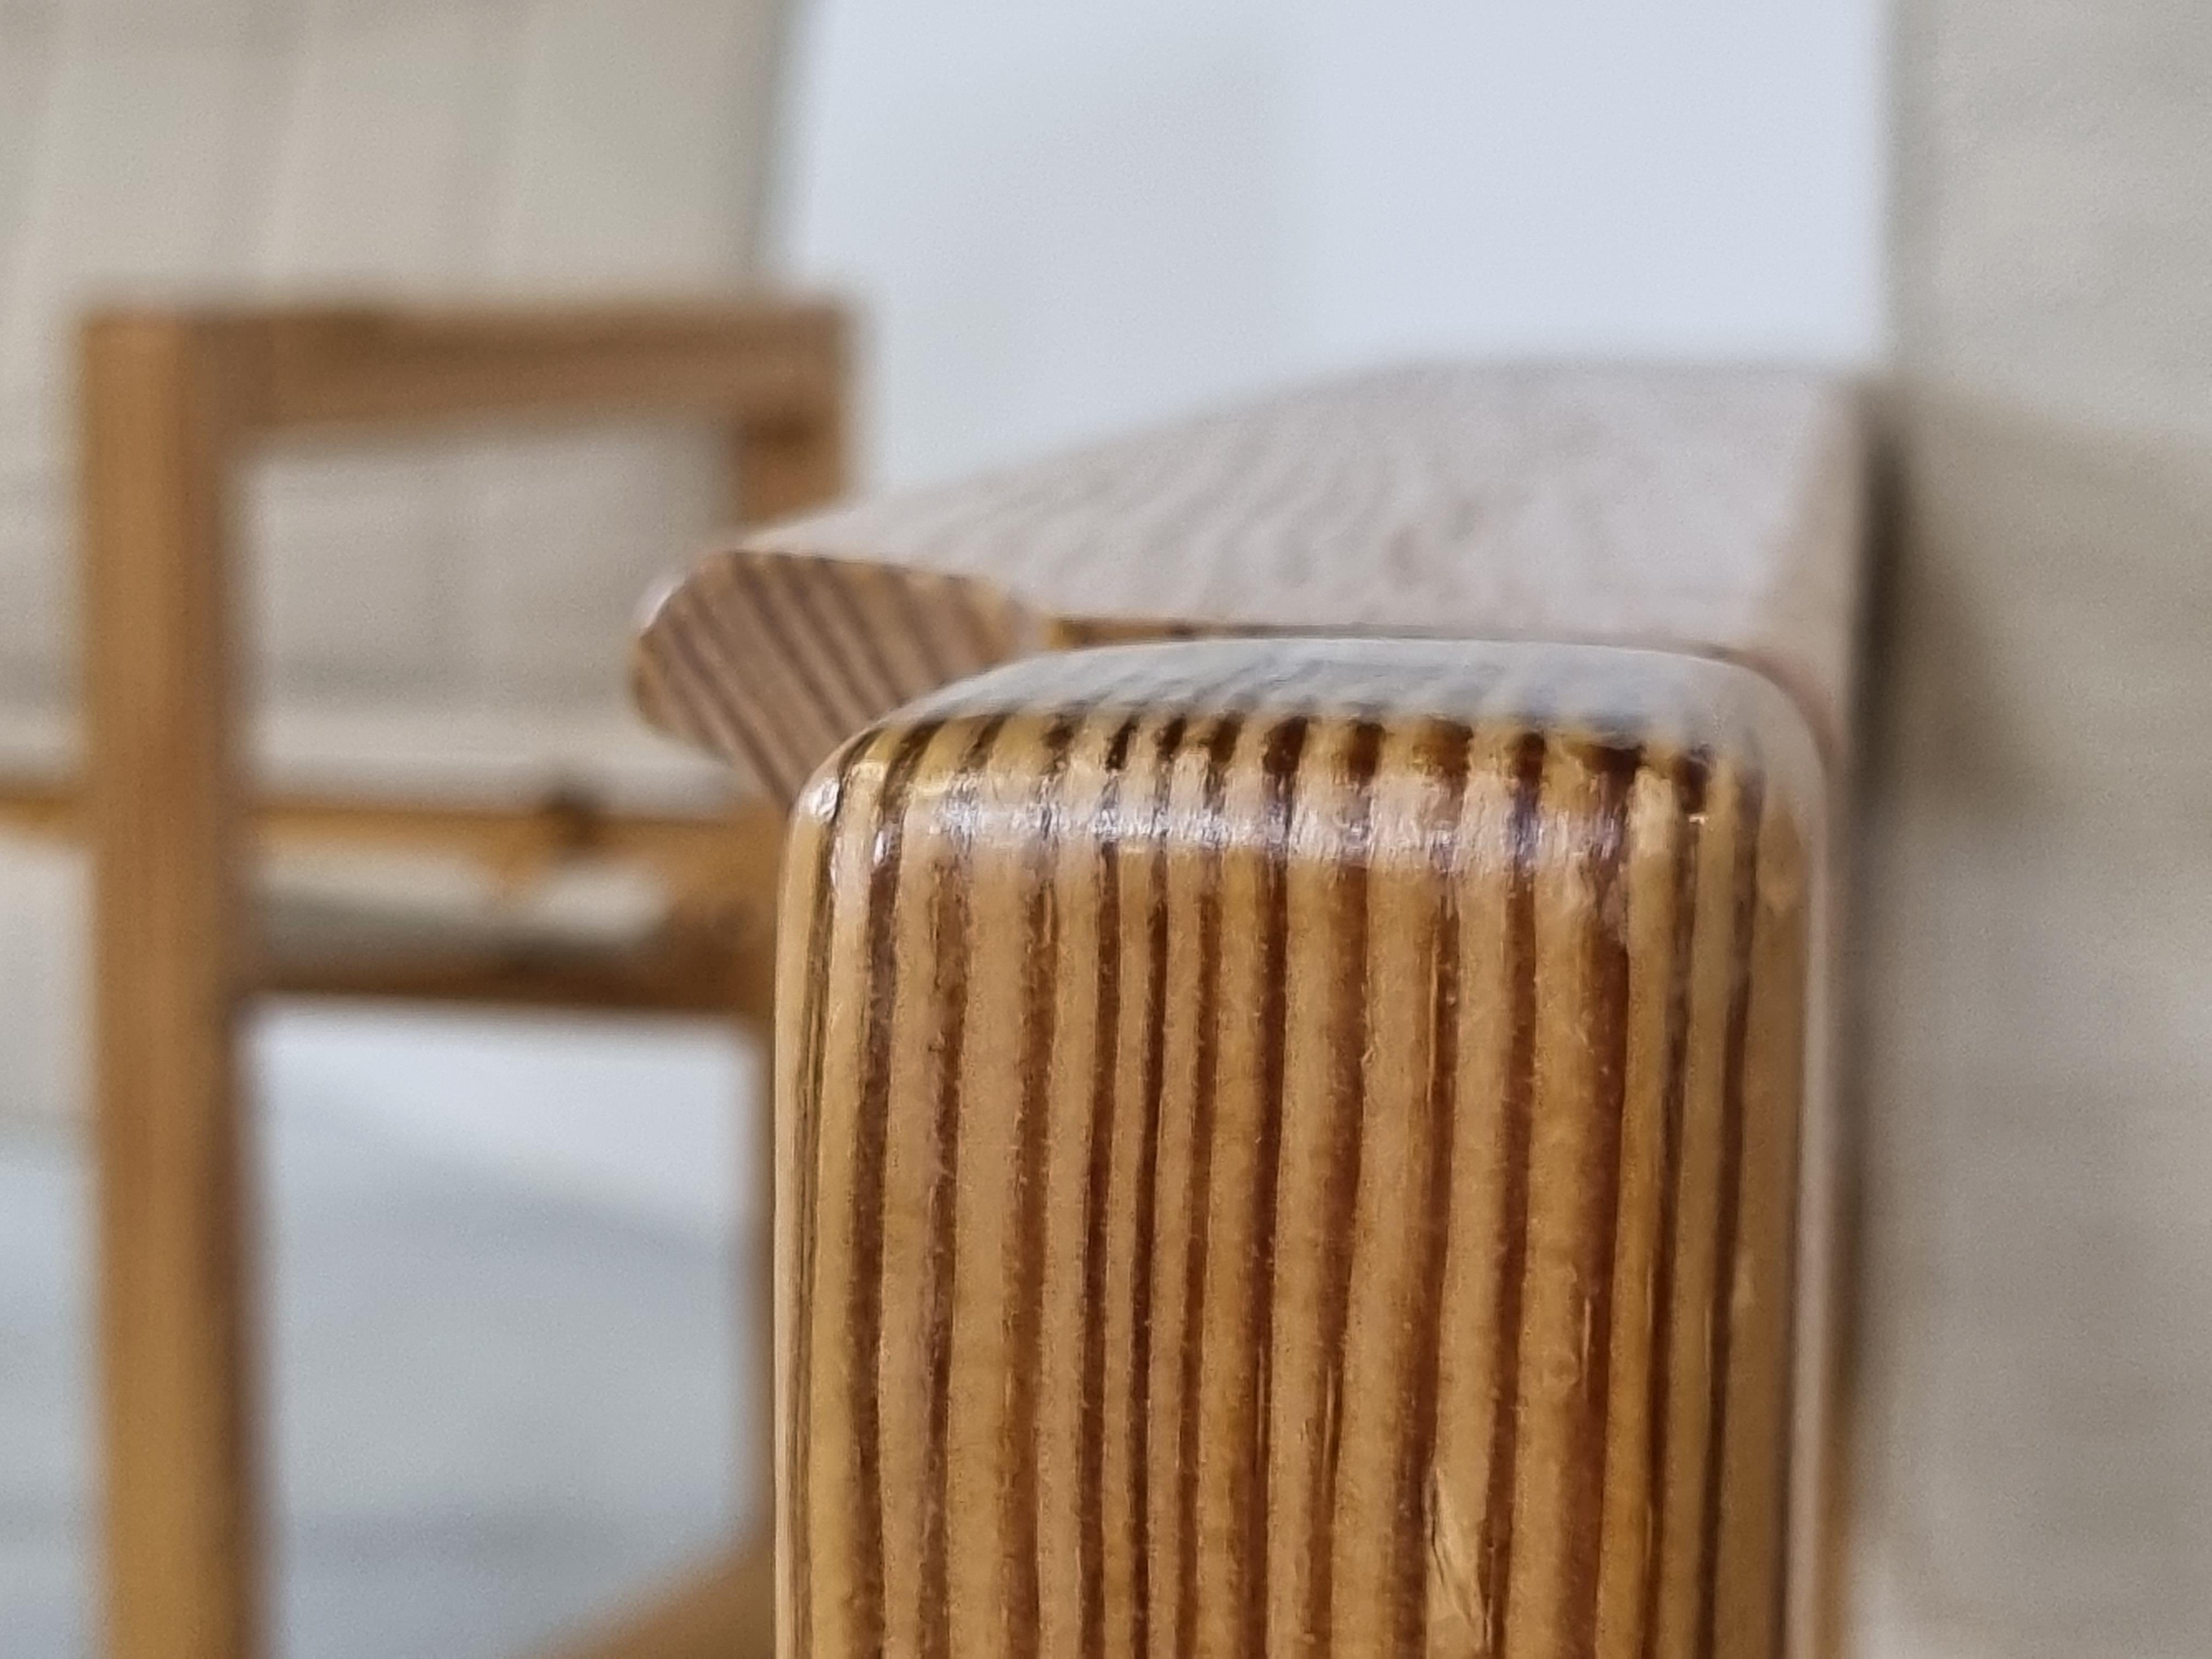 Charming pair of so called 'safari' armchairs designed by Karin Mobring for Ikea. The chair's model name is 'Diana'

Made from solild pine wood frames with fabric canvas upholstery.

A nice design feature are the leather straps at the